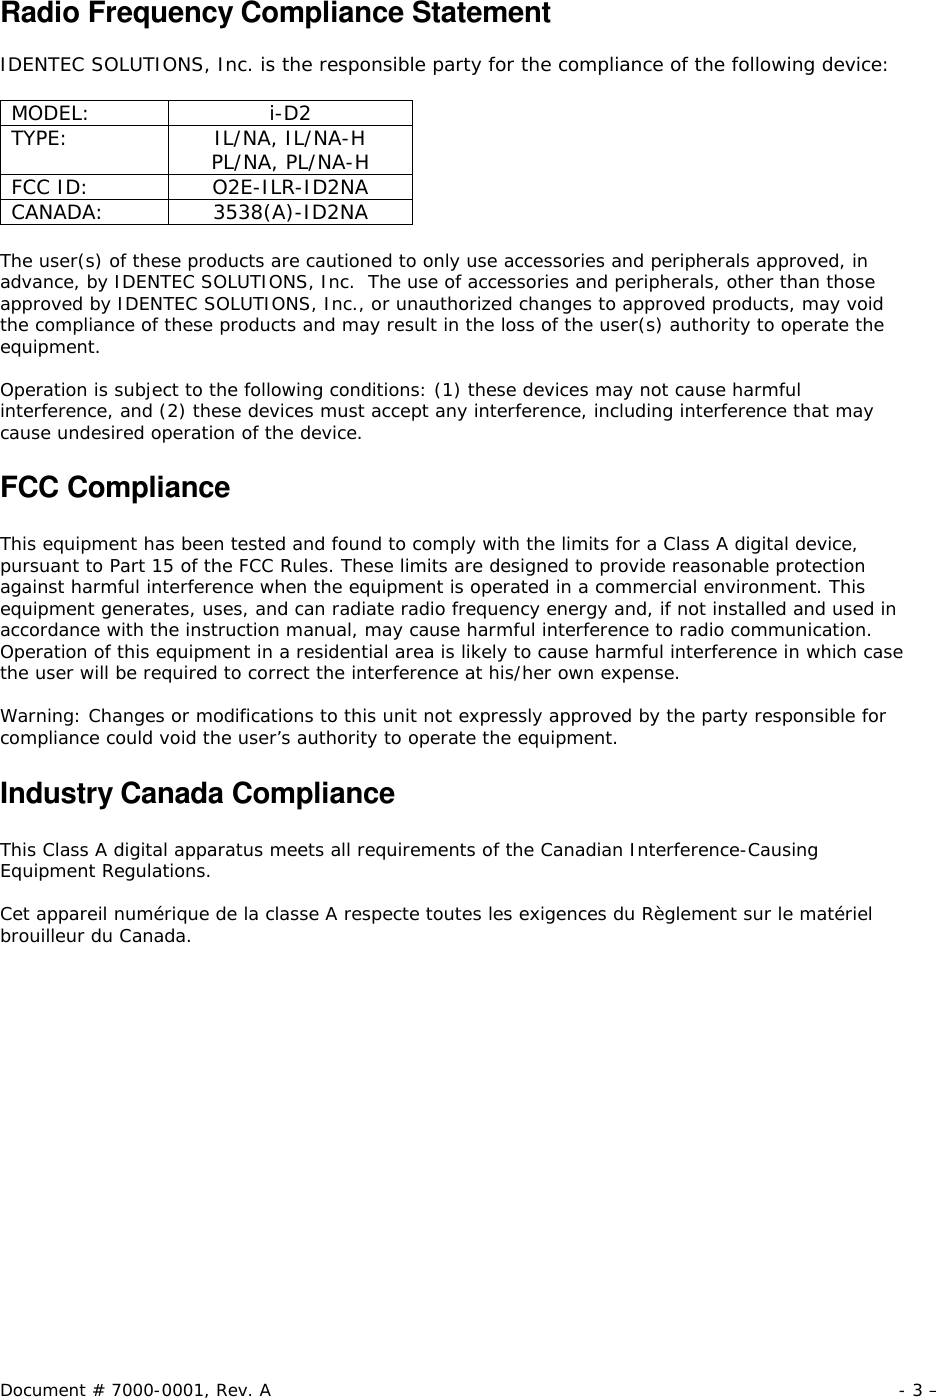 Document # 7000-0001, Rev. A - 3 –  Radio Frequency Compliance Statement  IDENTEC SOLUTIONS, Inc. is the responsible party for the compliance of the following device:  MODEL: i-D2 TYPE: IL/NA, IL/NA-H PL/NA, PL/NA-H FCC ID: O2E-ILR-ID2NA CANADA: 3538(A)-ID2NA  The user(s) of these products are cautioned to only use accessories and peripherals approved, in advance, by IDENTEC SOLUTIONS, Inc.  The use of accessories and peripherals, other than those approved by IDENTEC SOLUTIONS, Inc., or unauthorized changes to approved products, may void the compliance of these products and may result in the loss of the user(s) authority to operate the equipment.  Operation is subject to the following conditions: (1) these devices may not cause harmful interference, and (2) these devices must accept any interference, including interference that may cause undesired operation of the device.  FCC Compliance  This equipment has been tested and found to comply with the limits for a Class A digital device, pursuant to Part 15 of the FCC Rules. These limits are designed to provide reasonable protection against harmful interference when the equipment is operated in a commercial environment. This equipment generates, uses, and can radiate radio frequency energy and, if not installed and used in accordance with the instruction manual, may cause harmful interference to radio communication. Operation of this equipment in a residential area is likely to cause harmful interference in which case the user will be required to correct the interference at his/her own expense.  Warning: Changes or modifications to this unit not expressly approved by the party responsible for compliance could void the user’s authority to operate the equipment.  Industry Canada Compliance  This Class A digital apparatus meets all requirements of the Canadian Interference-Causing Equipment Regulations.  Cet appareil numérique de la classe A respecte toutes les exigences du Règlement sur le matériel brouilleur du Canada. 